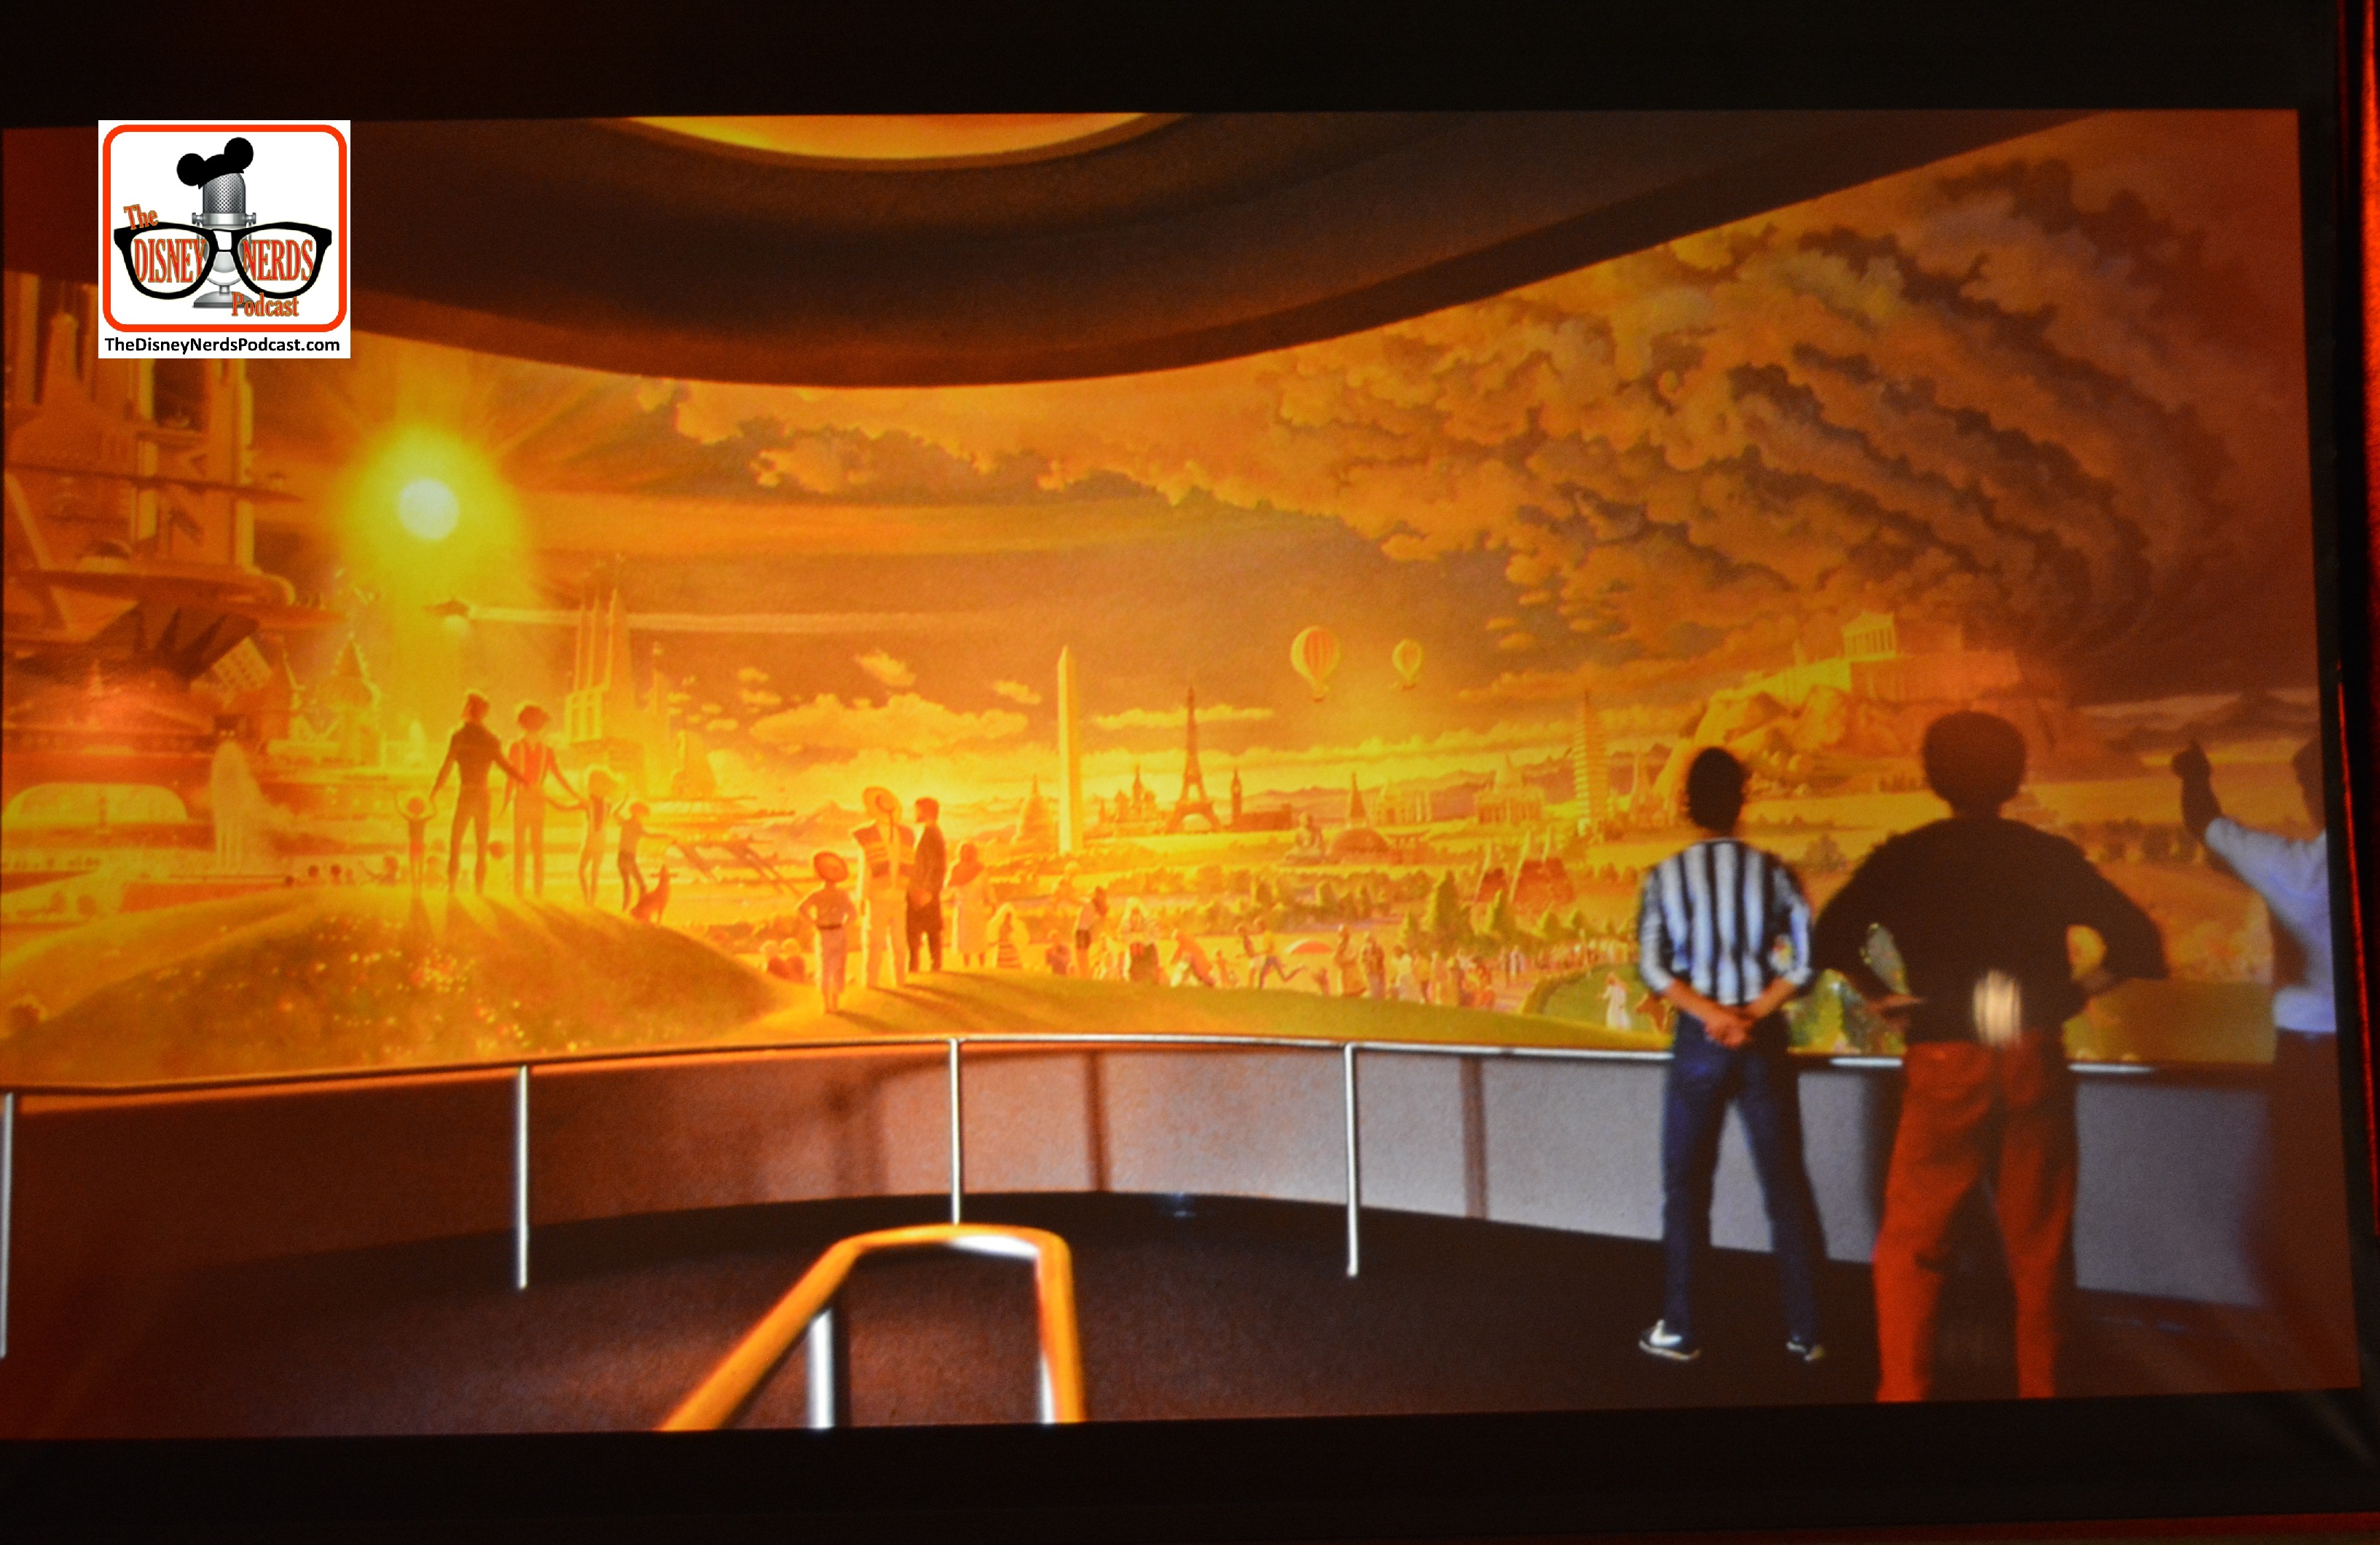 EEpcot Legacy Showplace - Horizons - From the Epcot History Slide Show #Epcot35